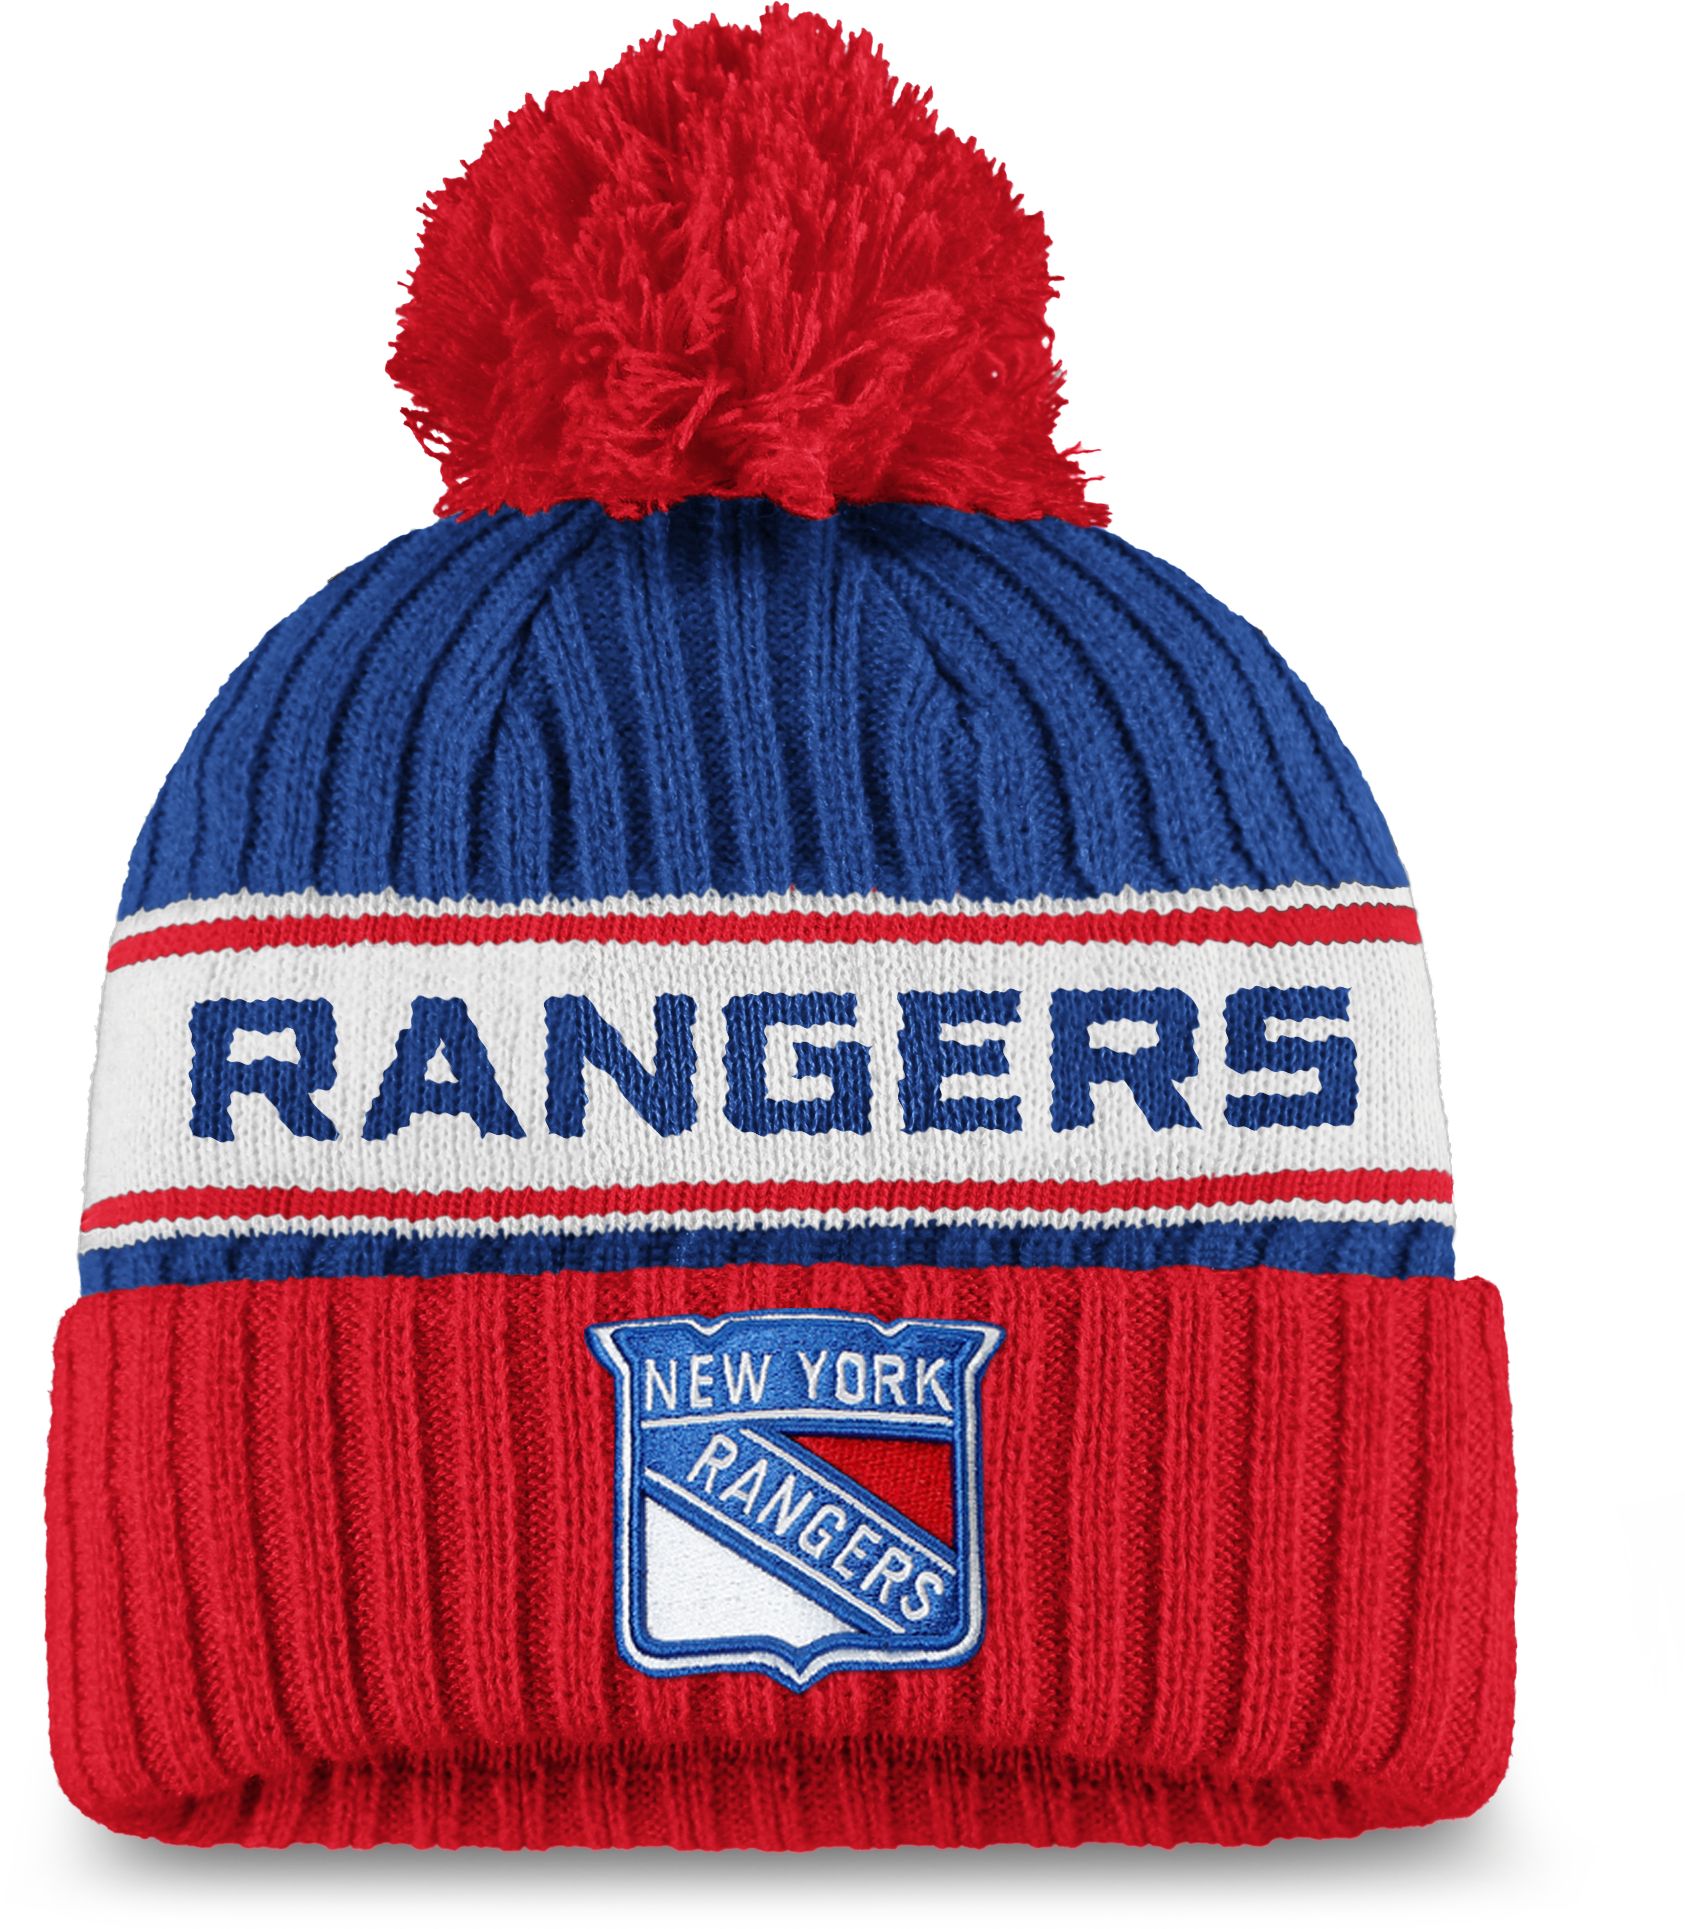 New York Rangers Hats  Curbside Pickup Available at DICK'S